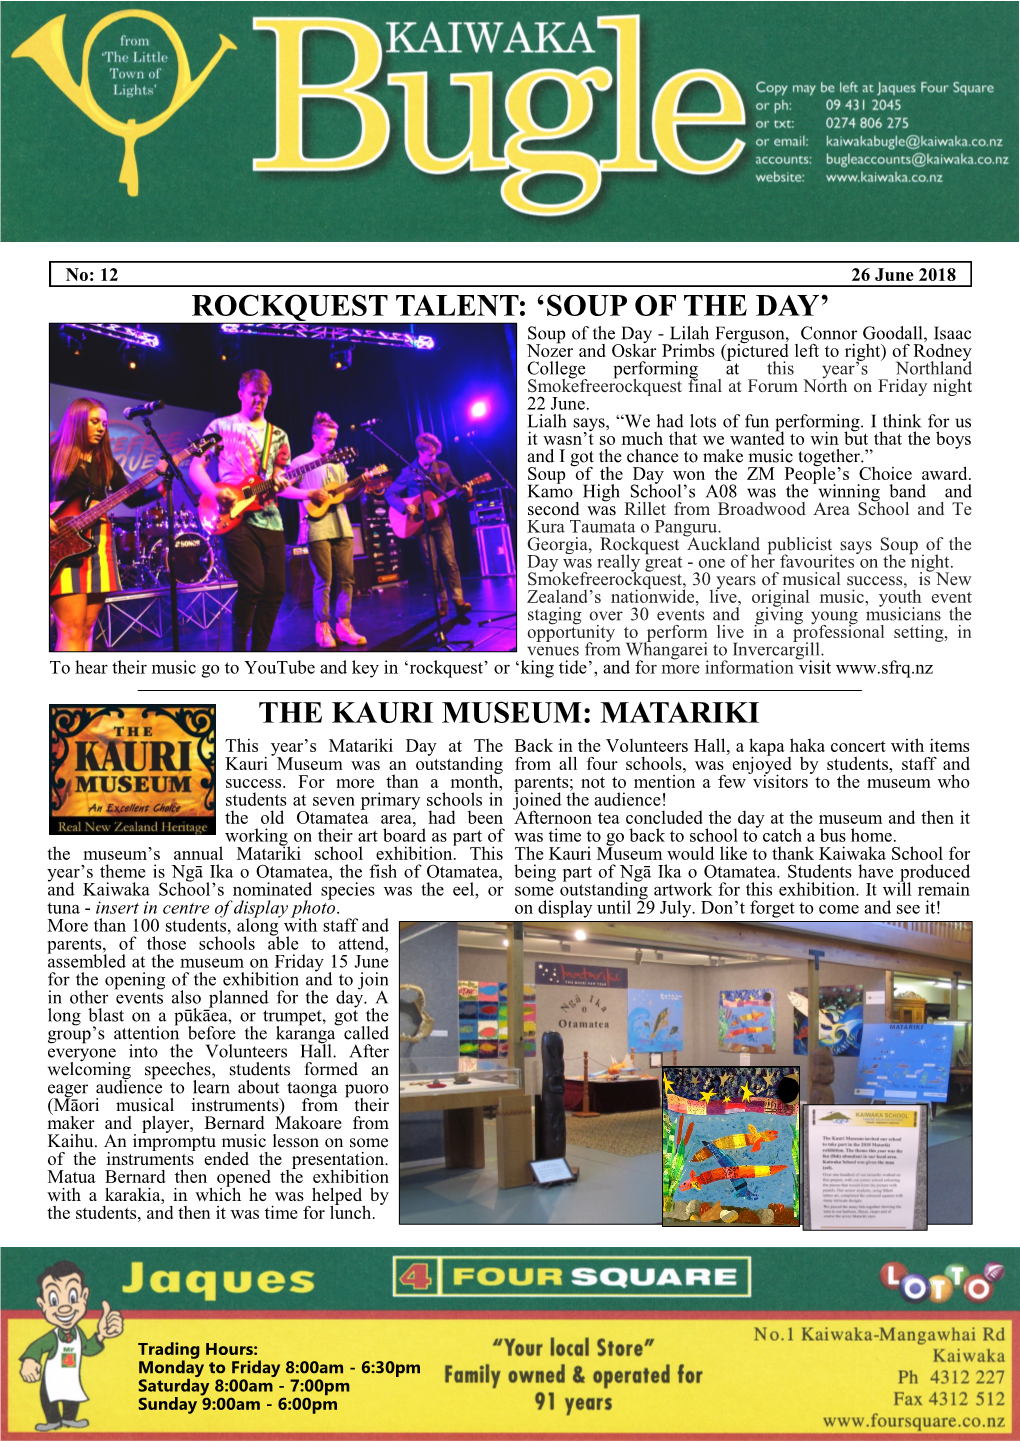 Rockquest Talent: 'Soup of the Day' the Kauri Museum